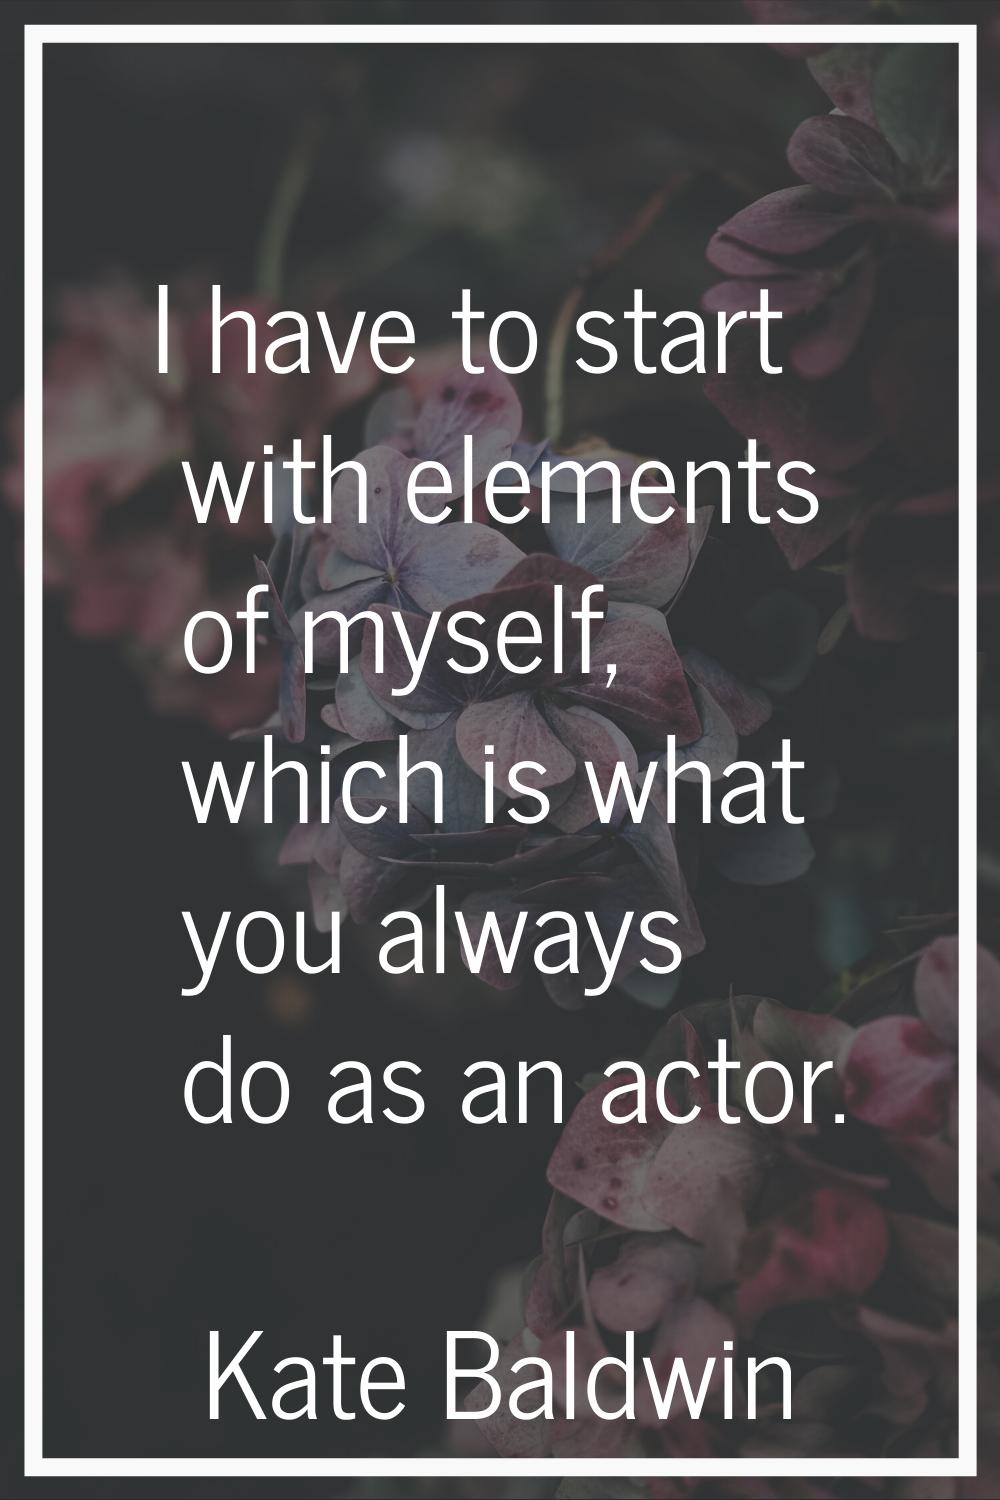 I have to start with elements of myself, which is what you always do as an actor.